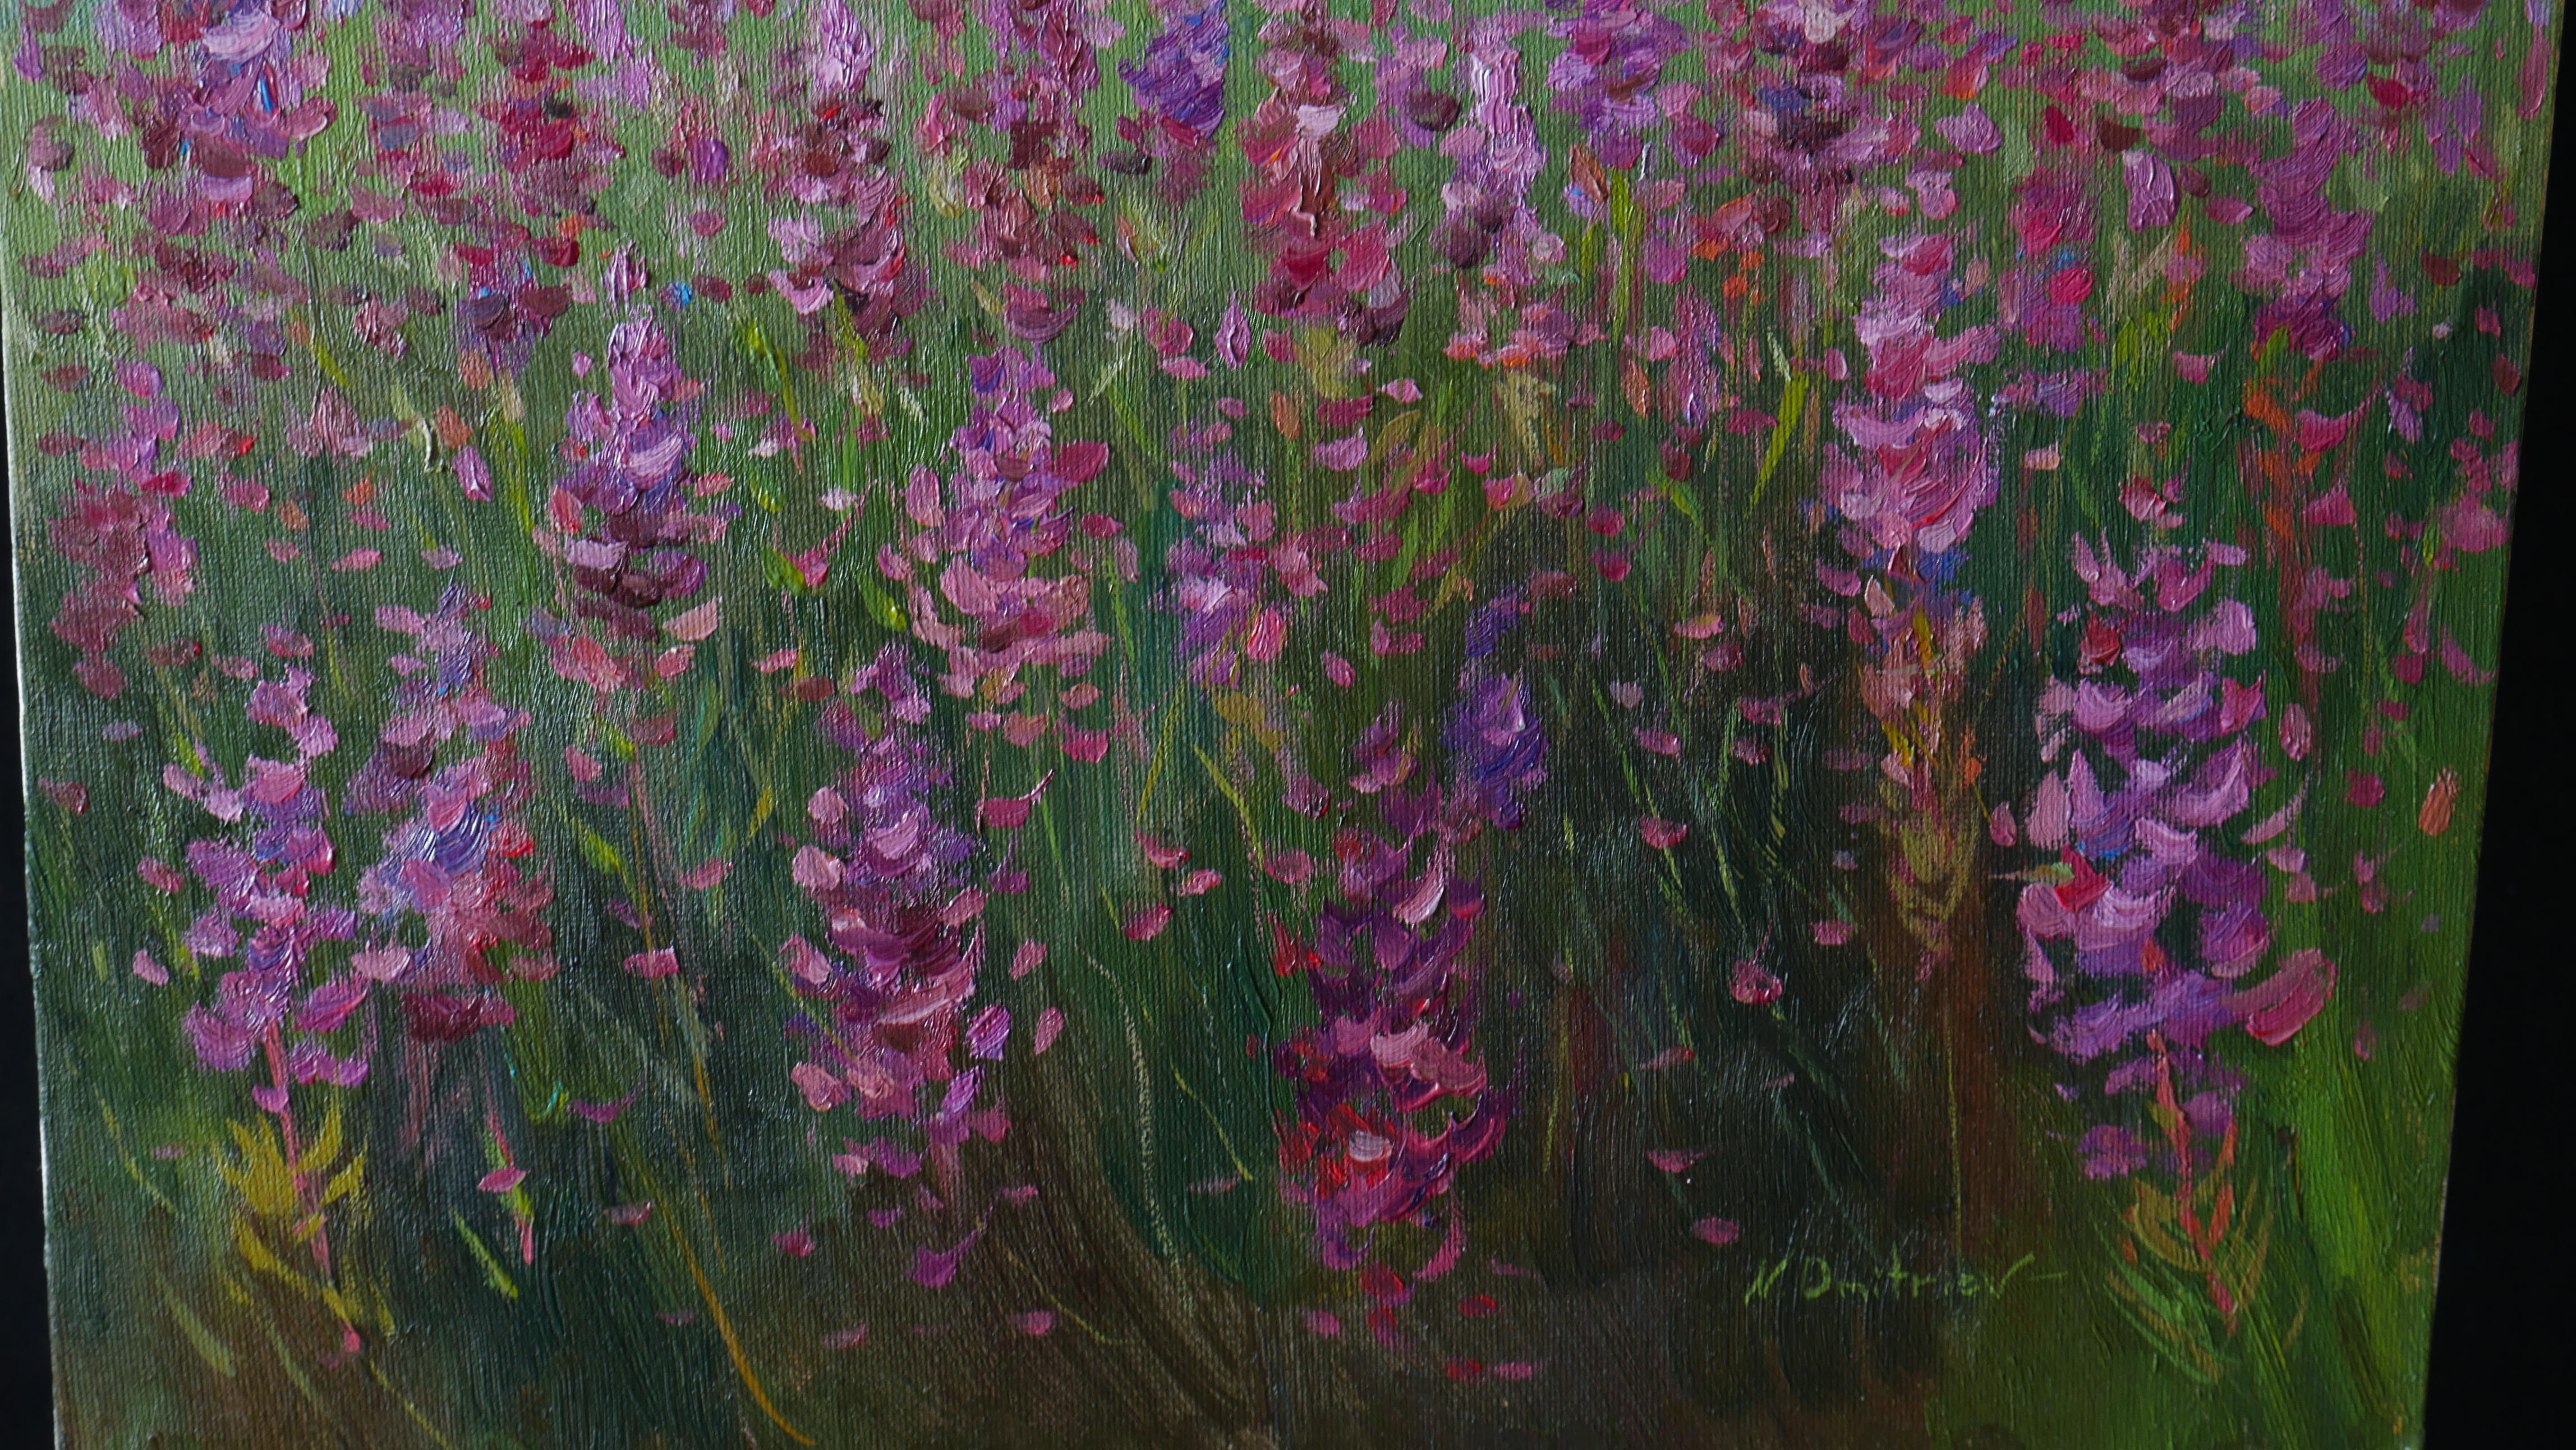 The Morning Over The Fireweed Field - summer landscape painting For Sale 2